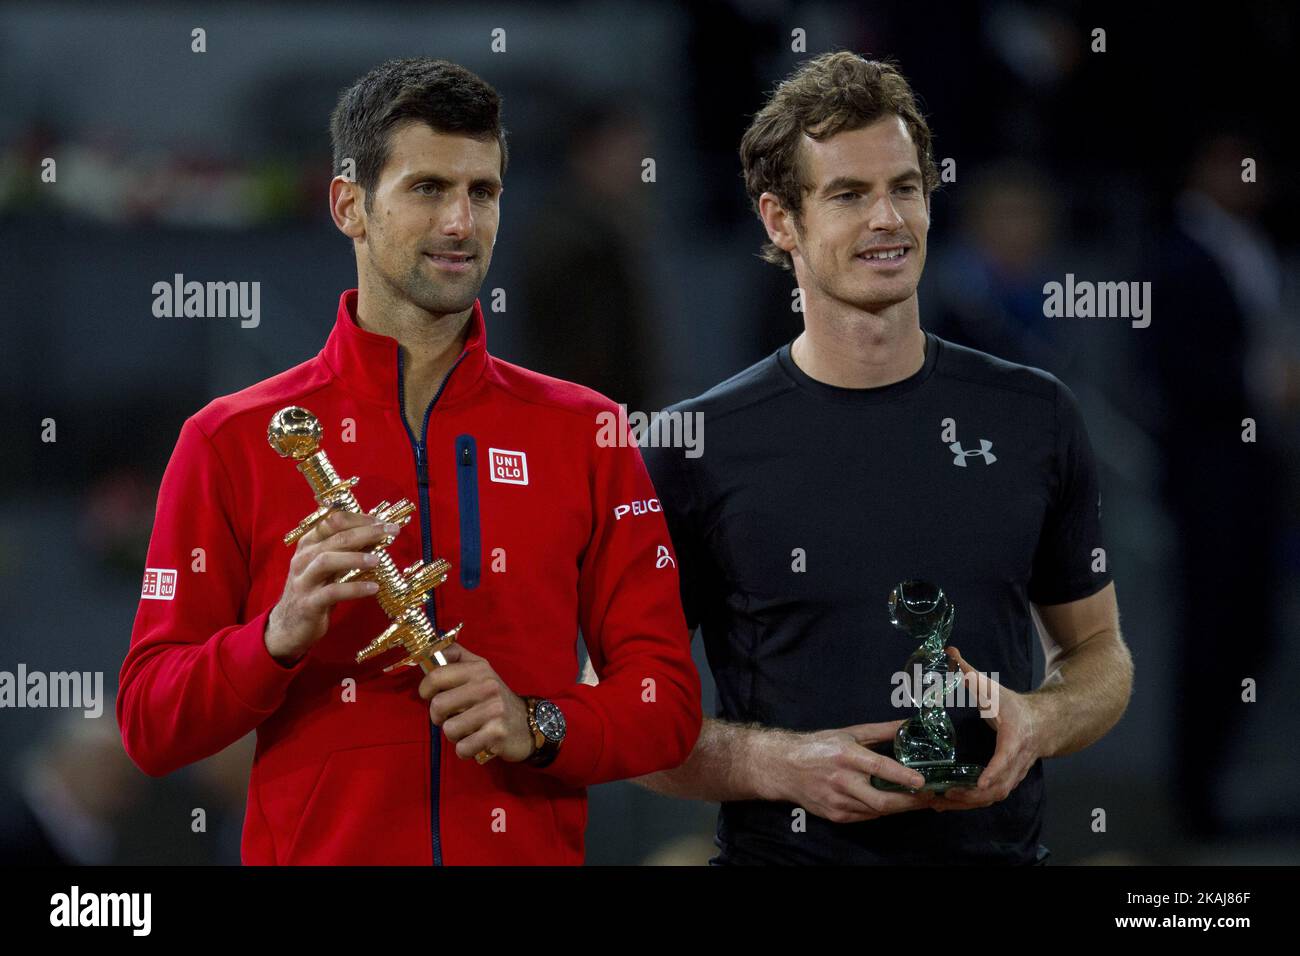 Novak Djokovic from Serbia (left) displays his trophy after winning the Madrid Open tennis tournament, men's final match against Andy Murray (right) from Great Britain  in Madrid, Spain, Sunday, May 8, 2016. Djokovic won 6-2, 3-6 and 6-3 (Photo by Rodrigo Garcia/NurPhoto) *** Please Use Credit from Credit Field *** Stock Photo